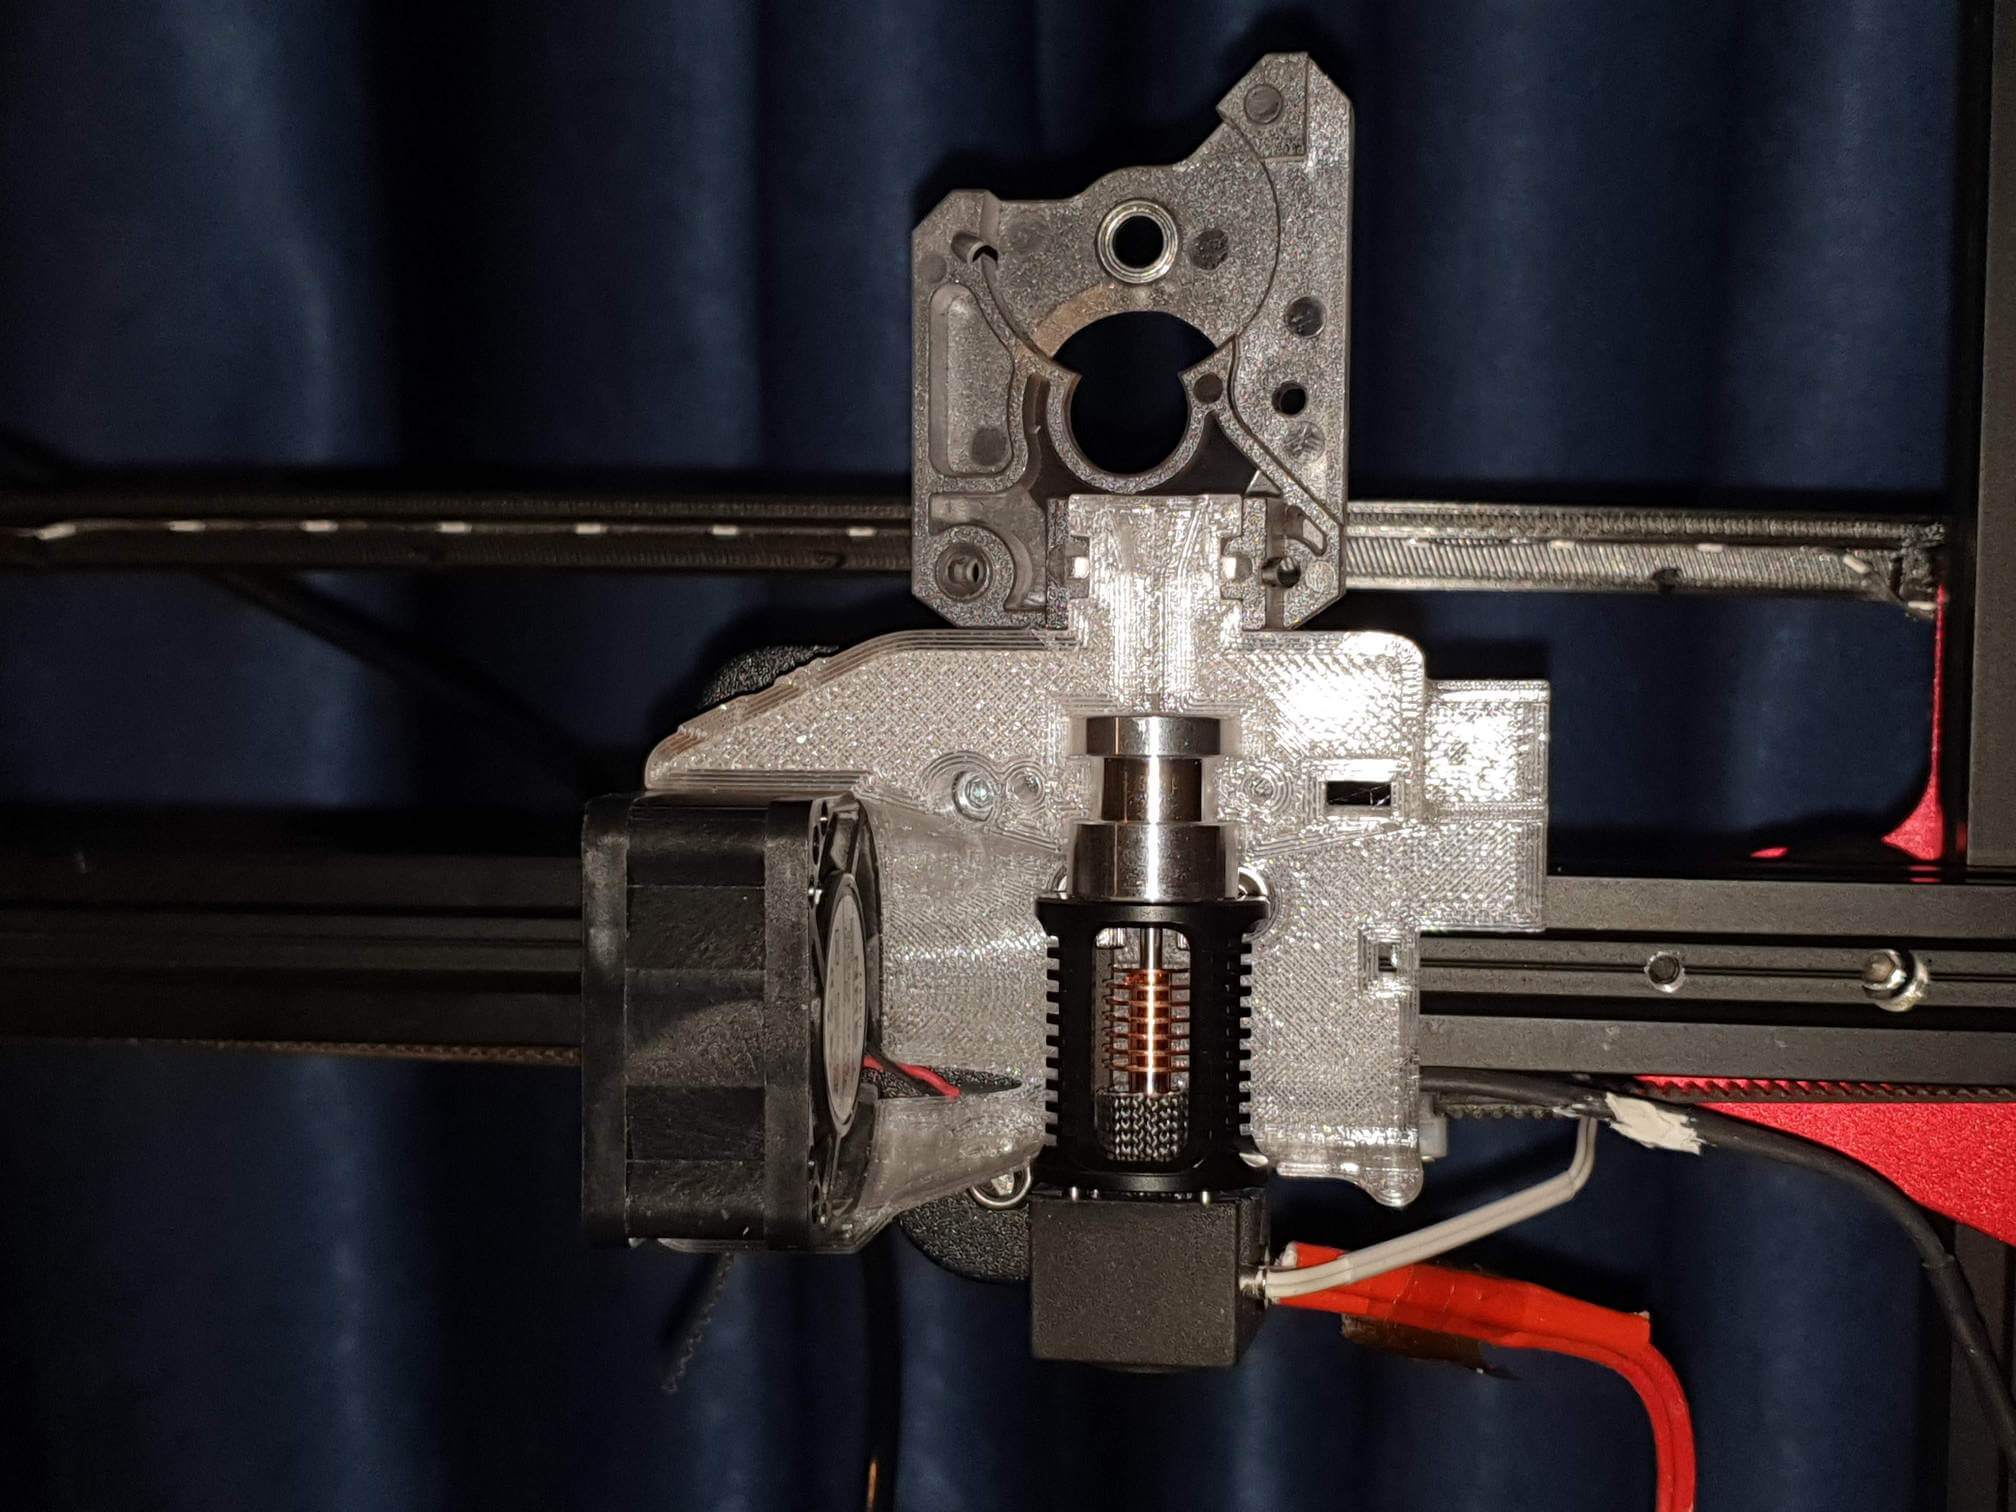 CR-10S PRO Direct Drive setup - BMG Extruder and Dragon Hotend.